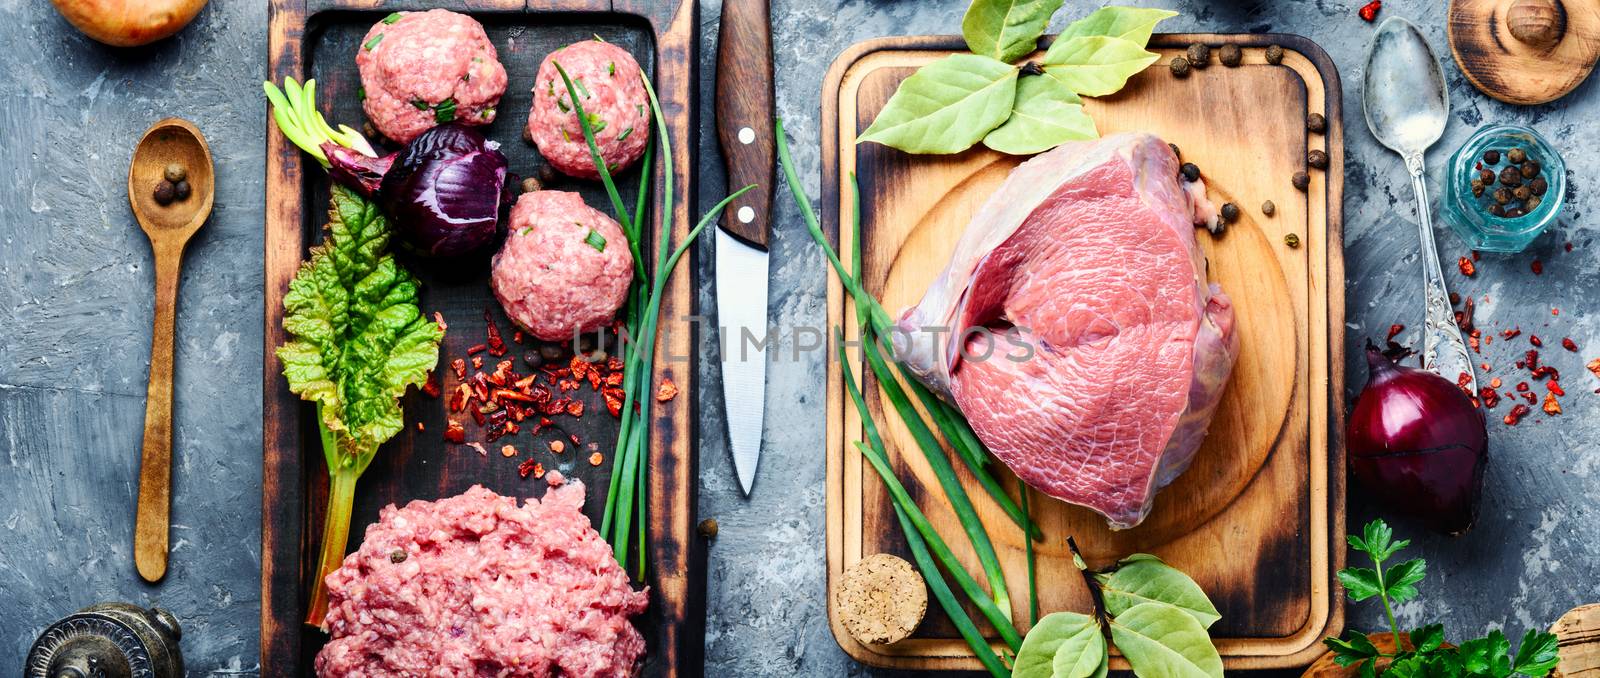 Meat balls from raw beef force-meat on kitchen board.Raw meat selection on wooden cutting board